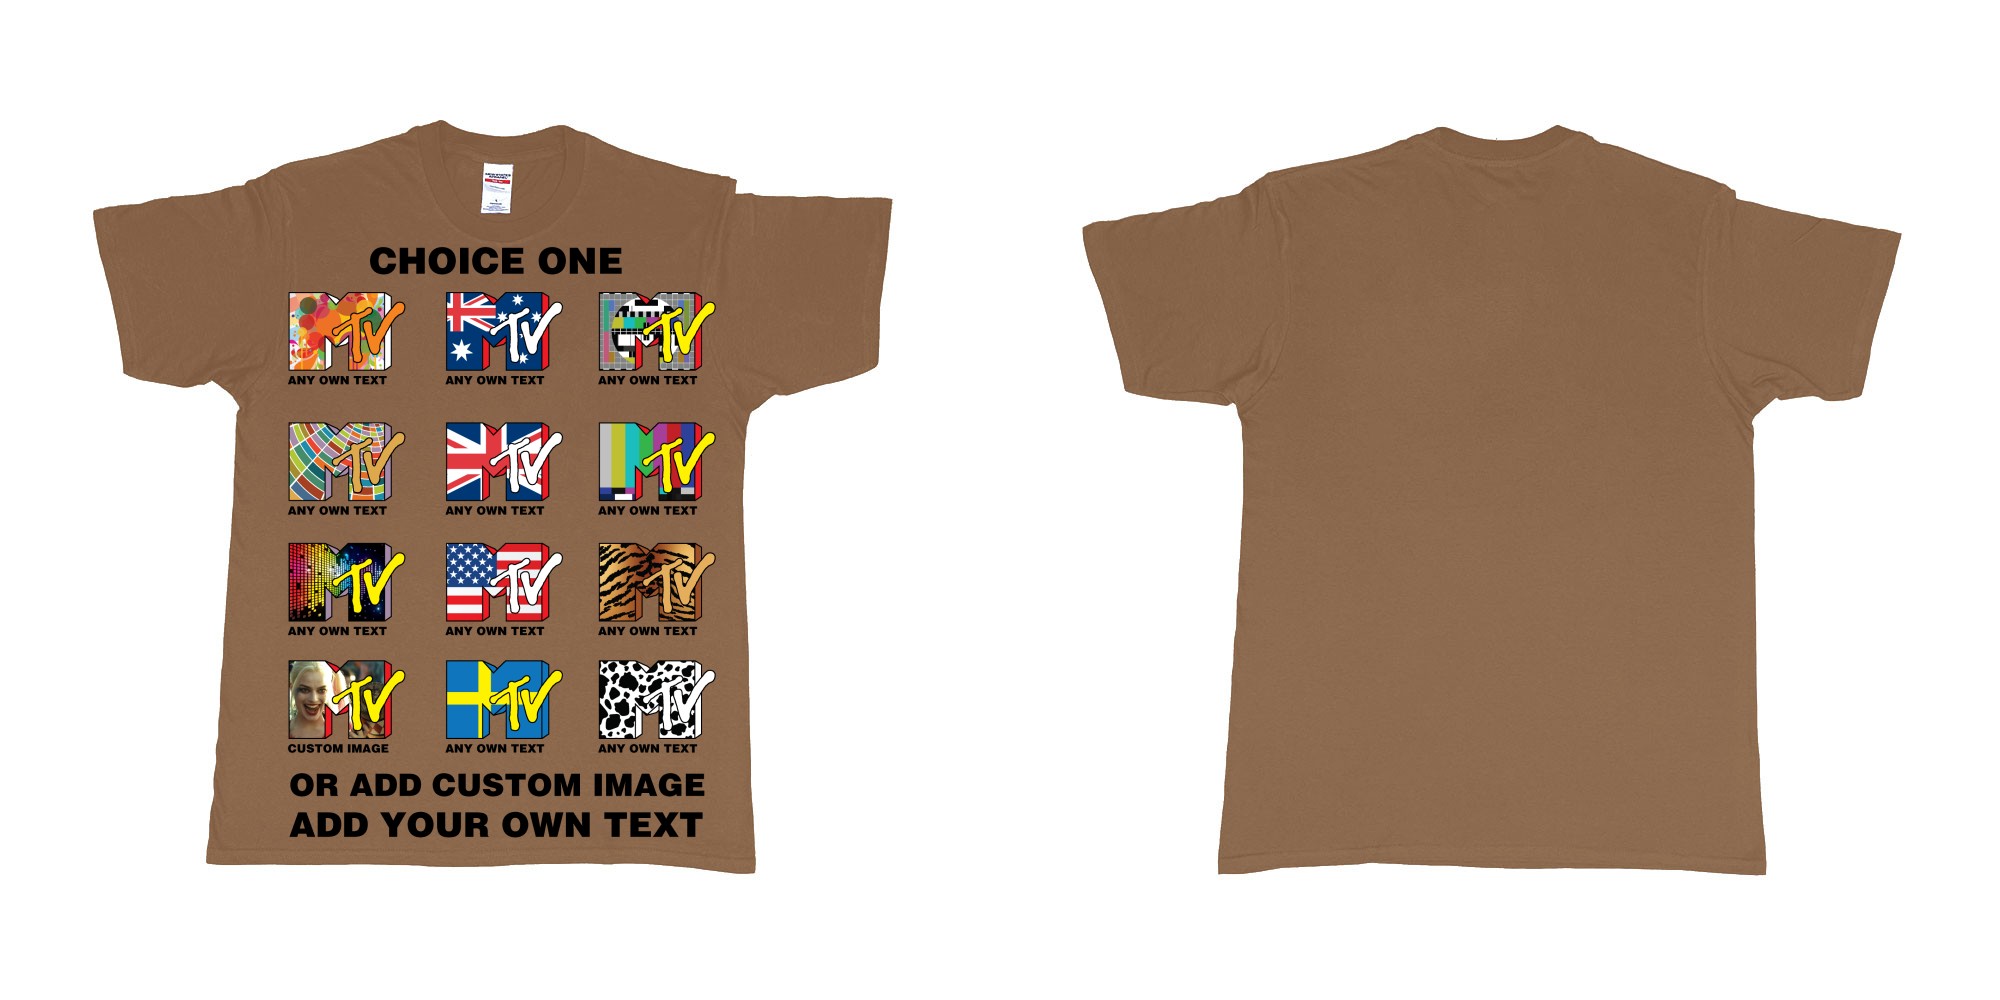 Custom tshirt design mtv logo choice any background text print in fabric color chestnut choice your own text made in Bali by The Pirate Way